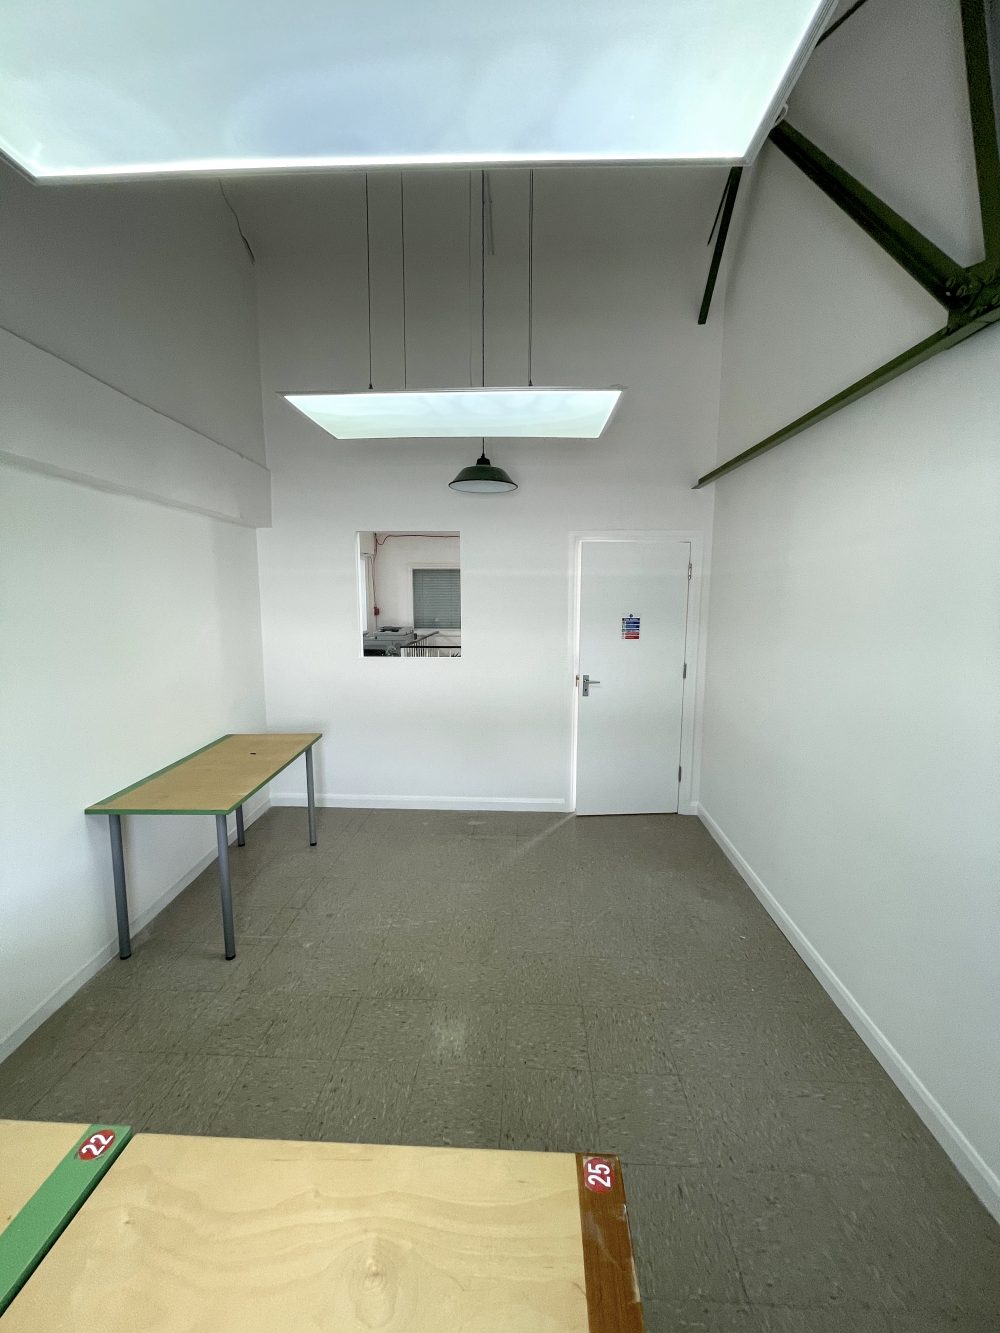 Studio Available to rent in N16 Green Lane Pic4